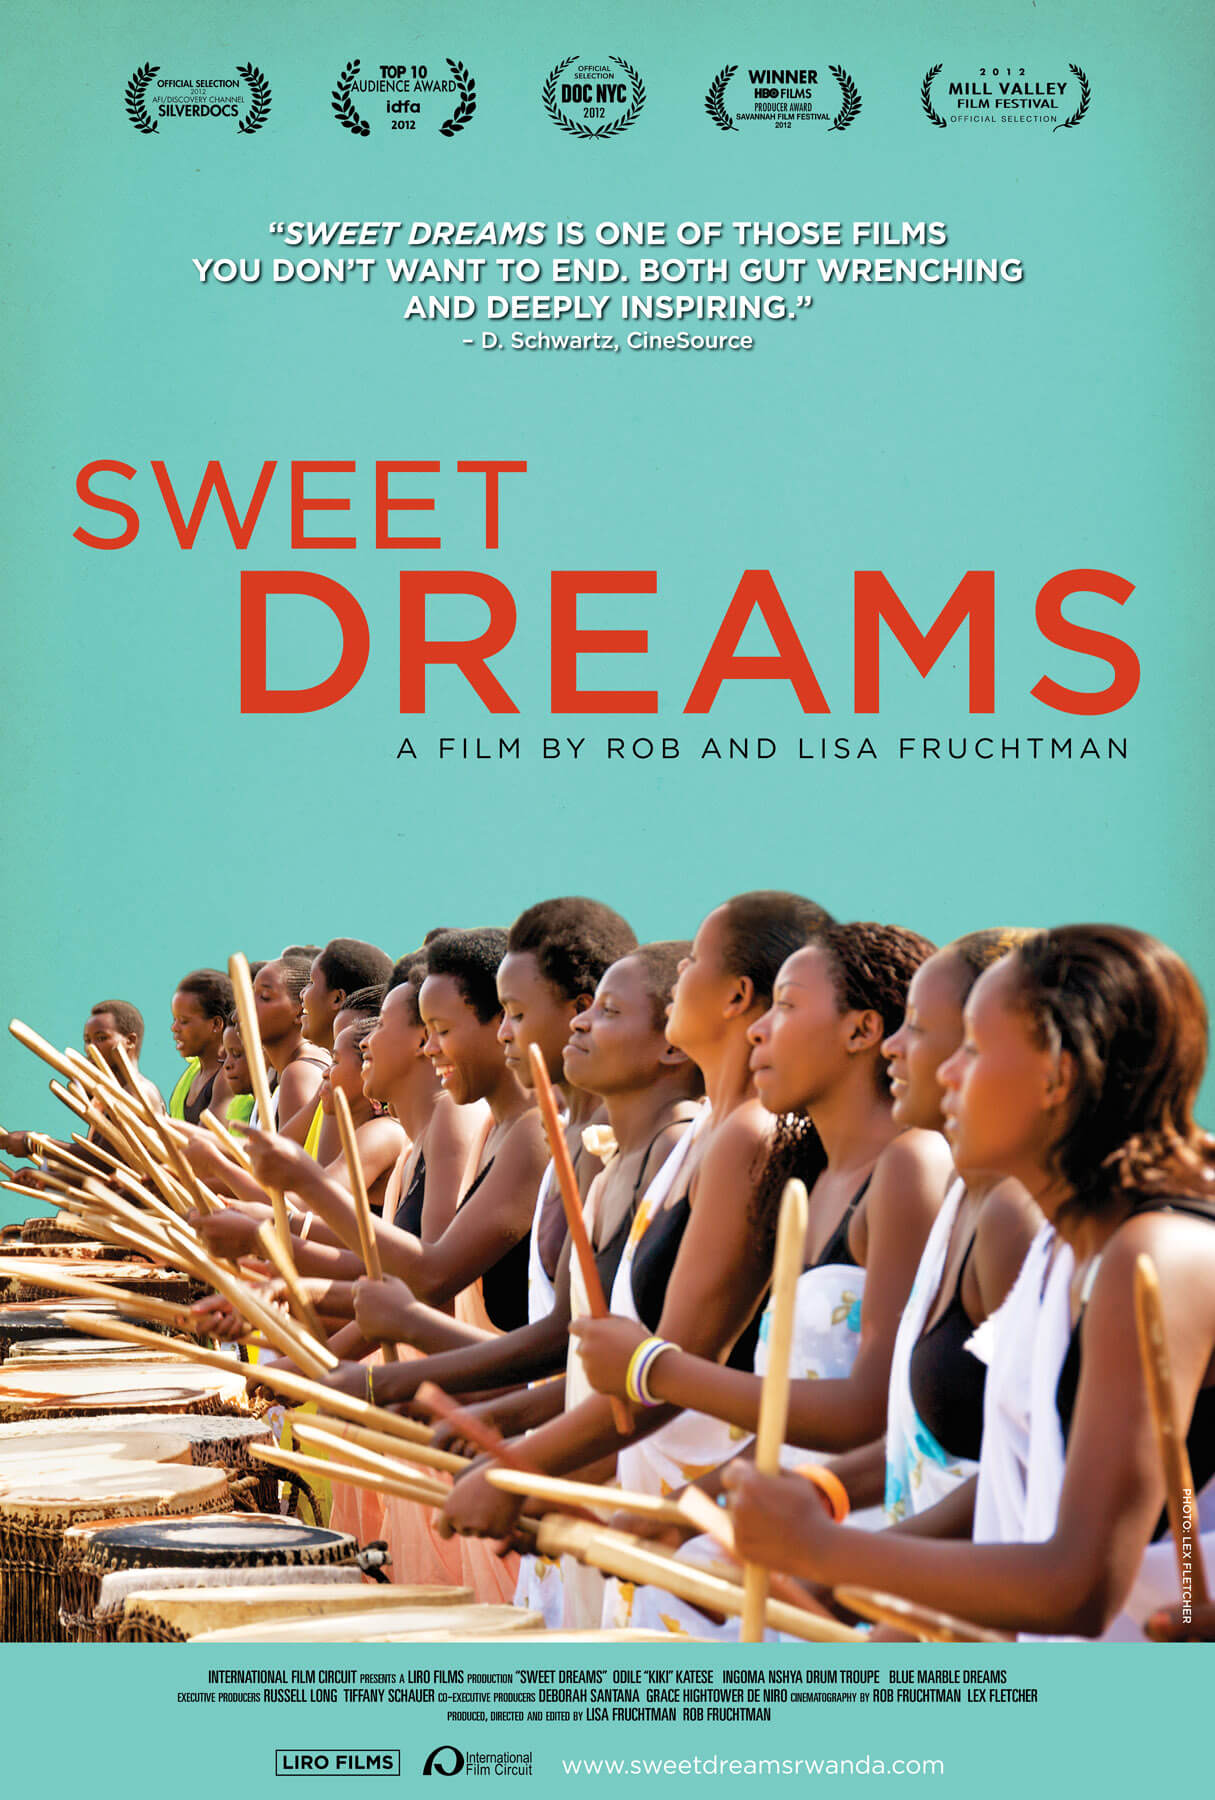 Graphic of the poster for Sweet Dreams. Starting in the bottom right hand corner, a line of women holding drumsticks, arms bent, mid drum-strike over stomach-height wooden drums stretches from the foreground into the background. The background is an artificial turqoise. All of the women are wearing black tank tops and a patterned one-shoulder wrap overtop.